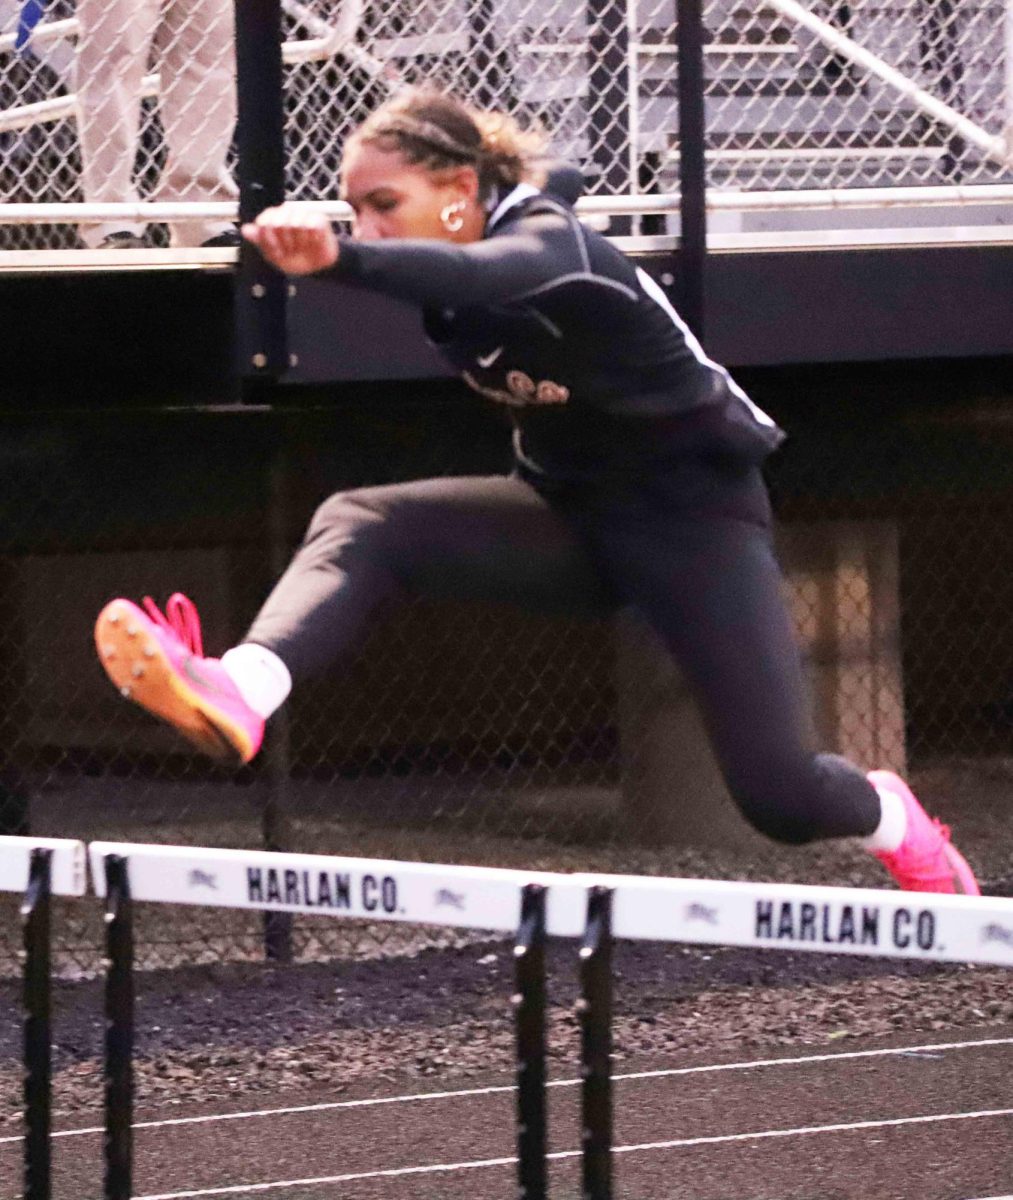 Harlan+County+senior+Paige+Phillips+set+two+new+school+records+Friday+as+she+won+the+100-meter+hurdles+and+high+jump+in+a+meet+at+HCHS.